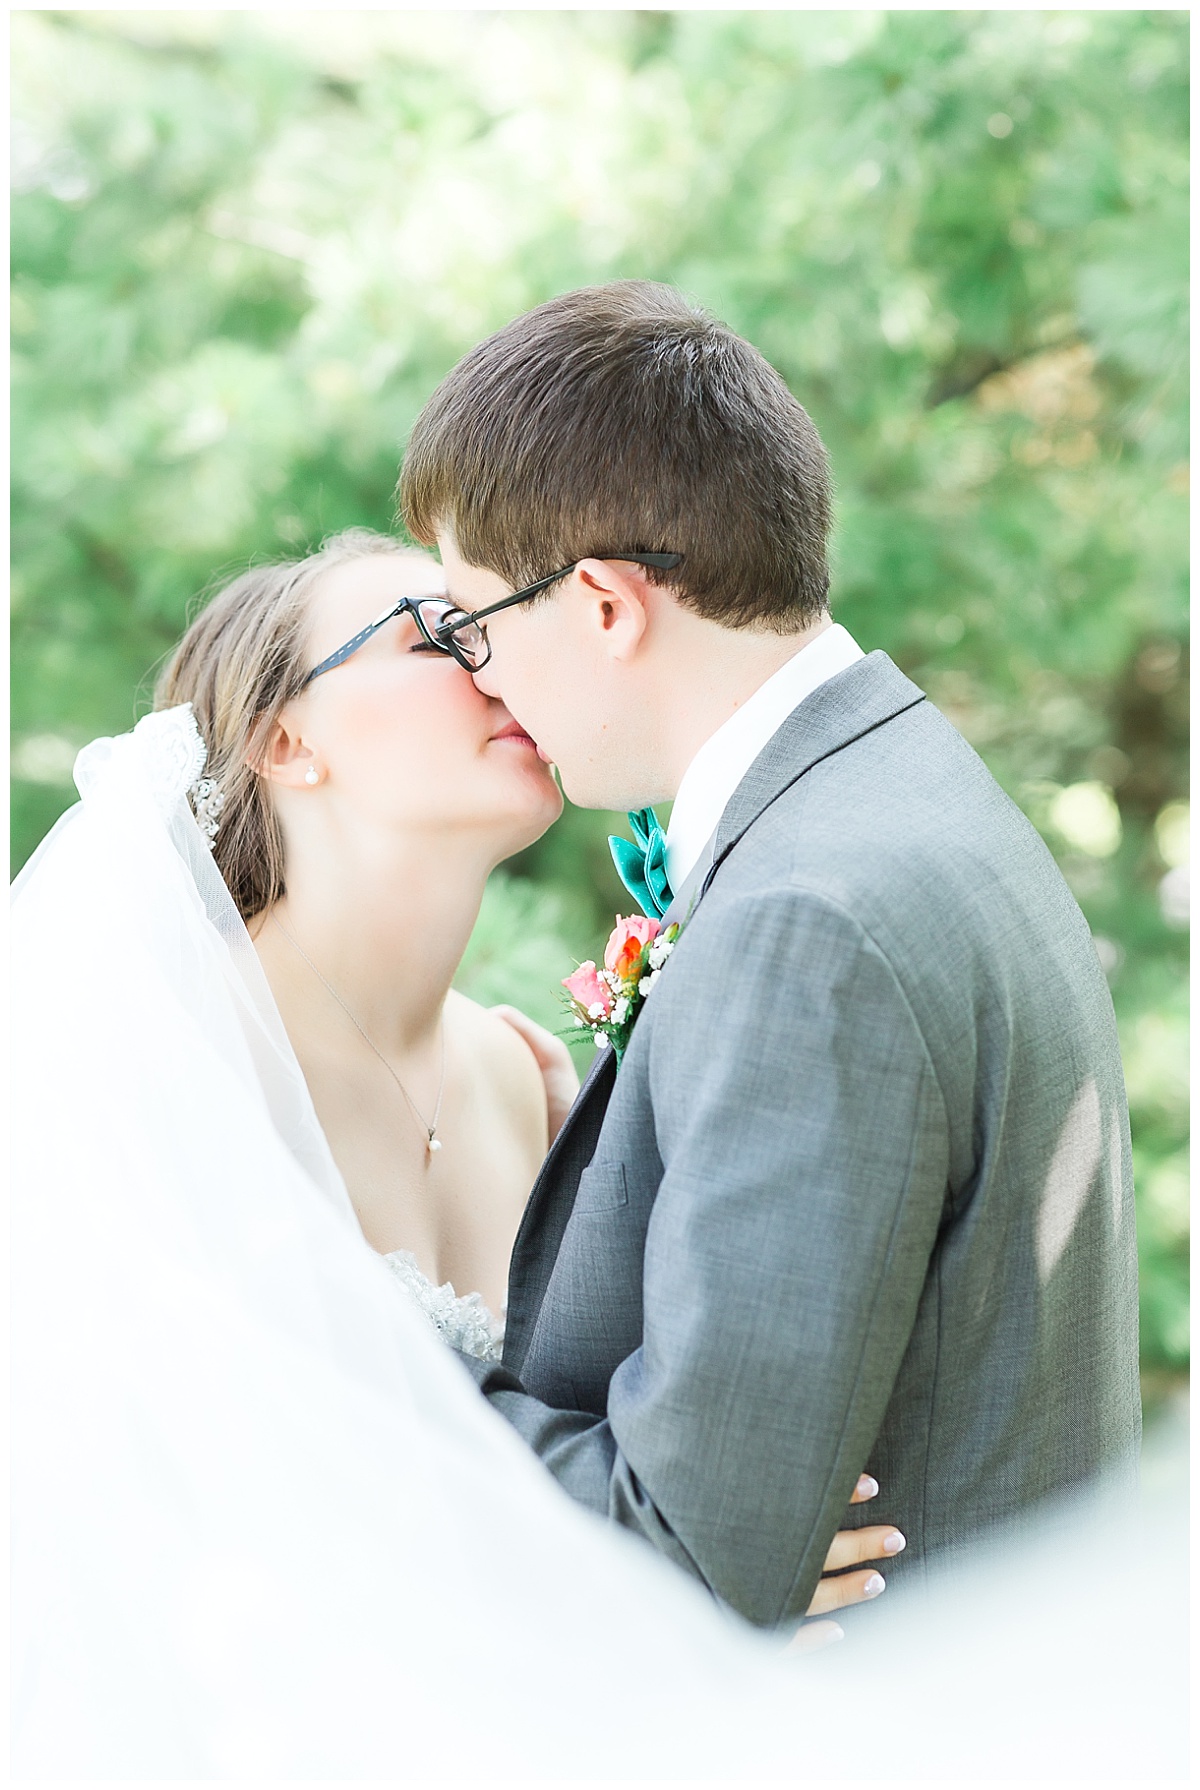 How to Choose a Wedding Photographer